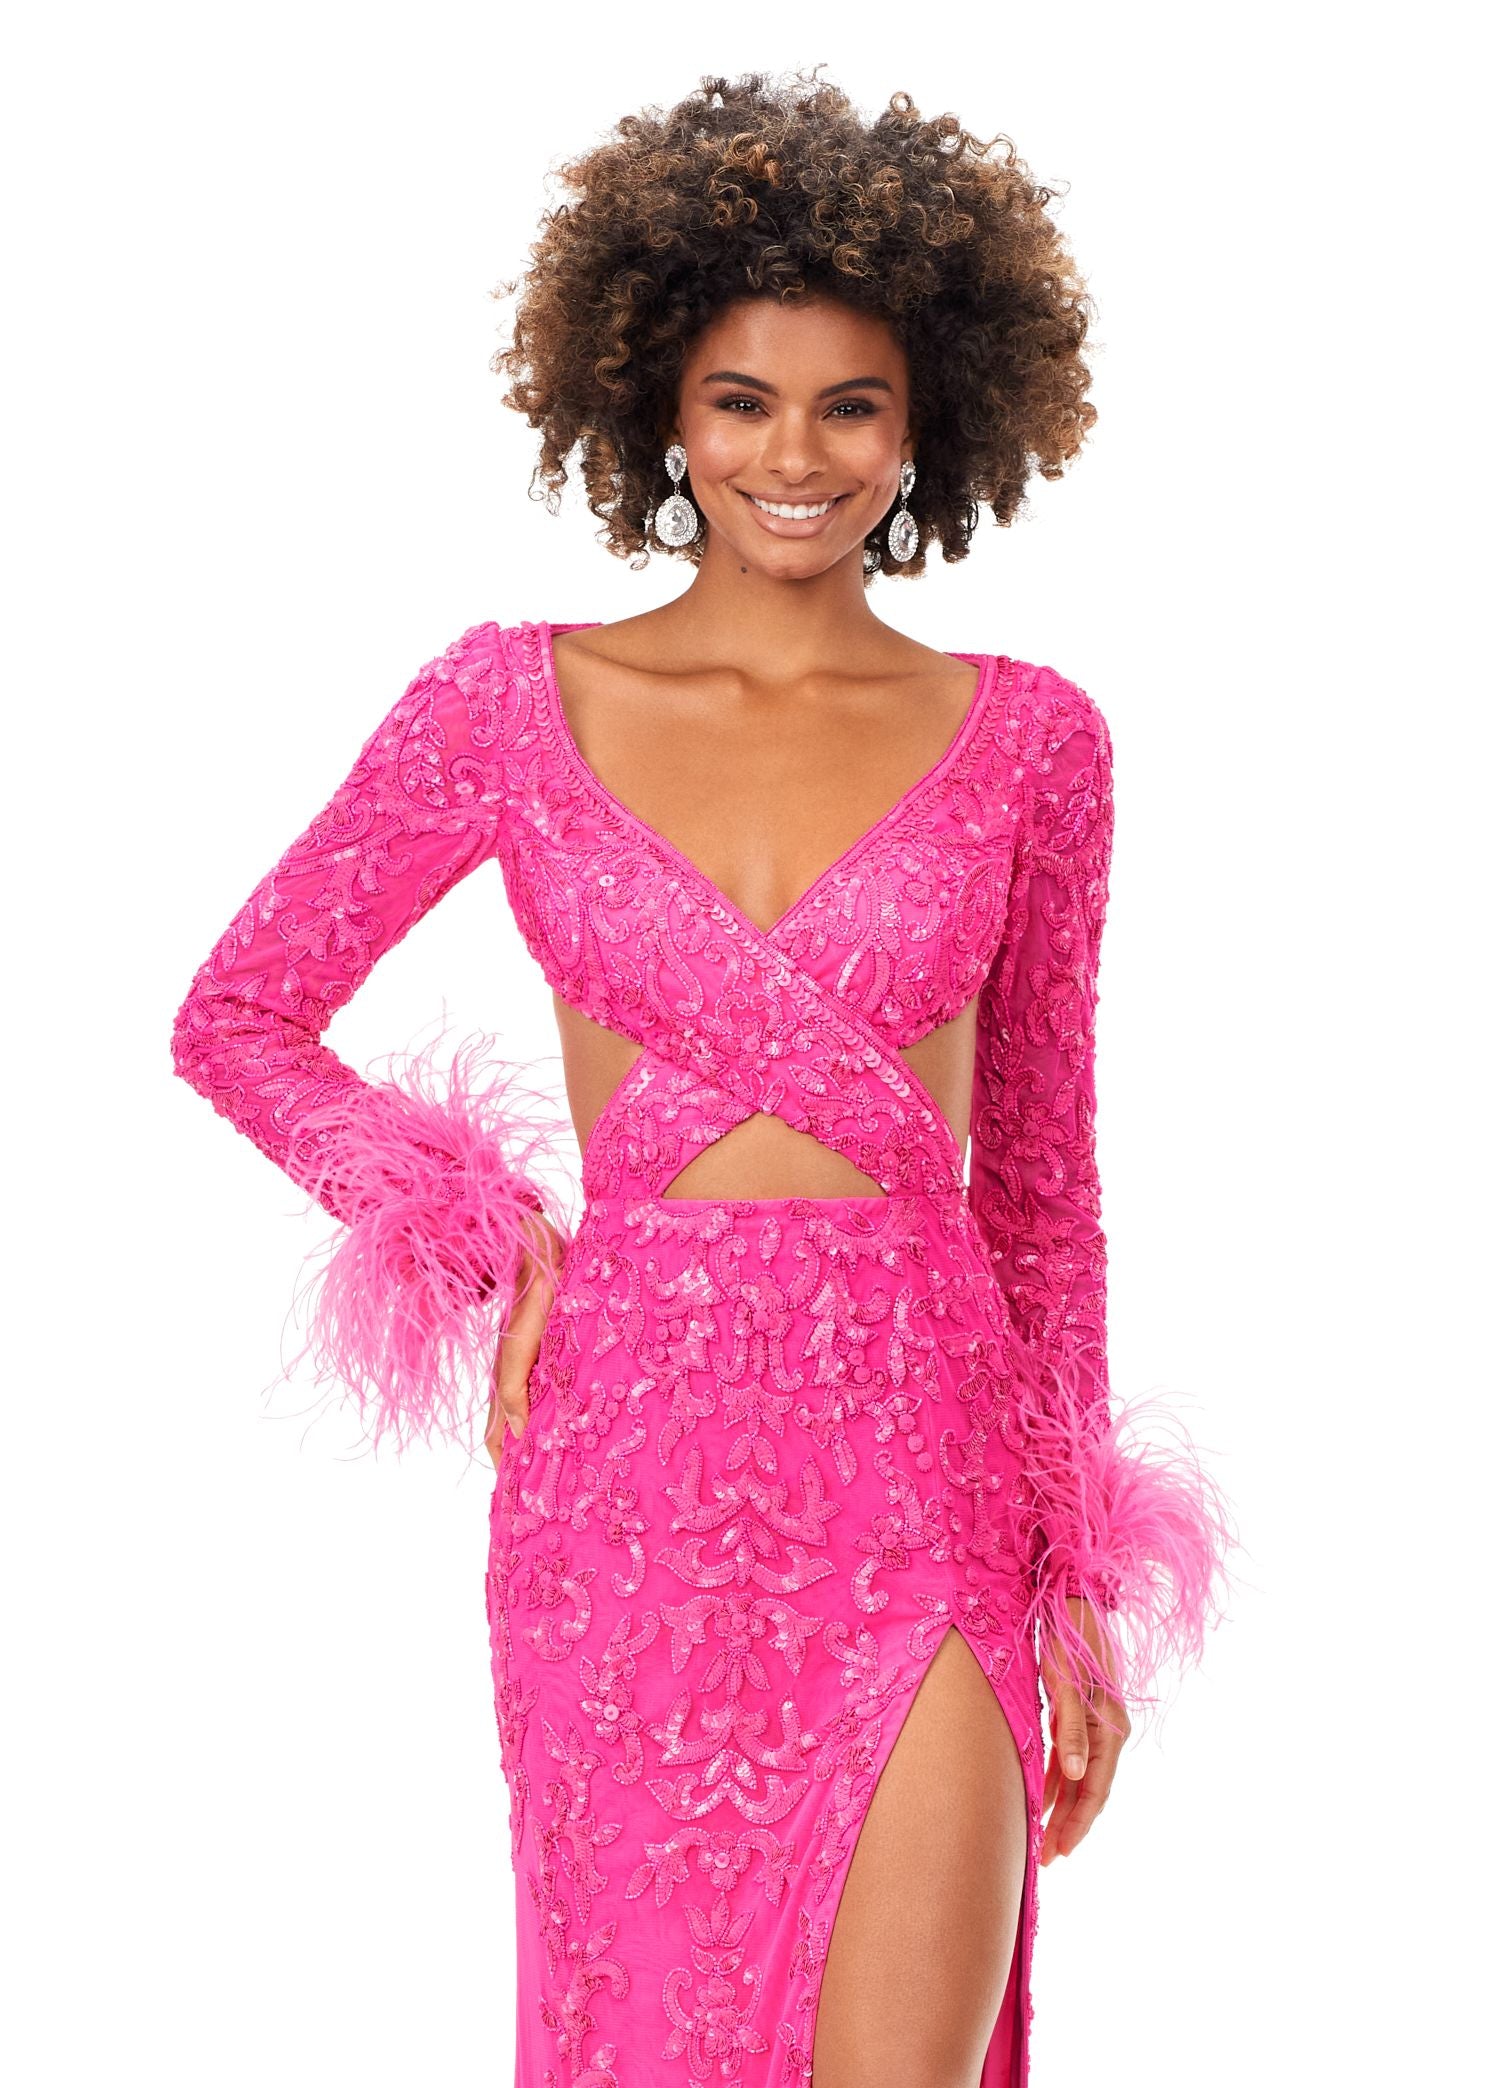 Ashley Lauren 11364 Talk about fabulous?! This beaded gown features a criss-cross cut out bodice and long sleeves. The sleeves are trimmed in feathers. The gown is complete with a left leg slit and sweep train. V-Neckline Criss Cross Bodice with Cut Outs Feather Trimmed Sleeves Left Leg Slit COLORS: Sky, Ivory, Hot Pink, Red